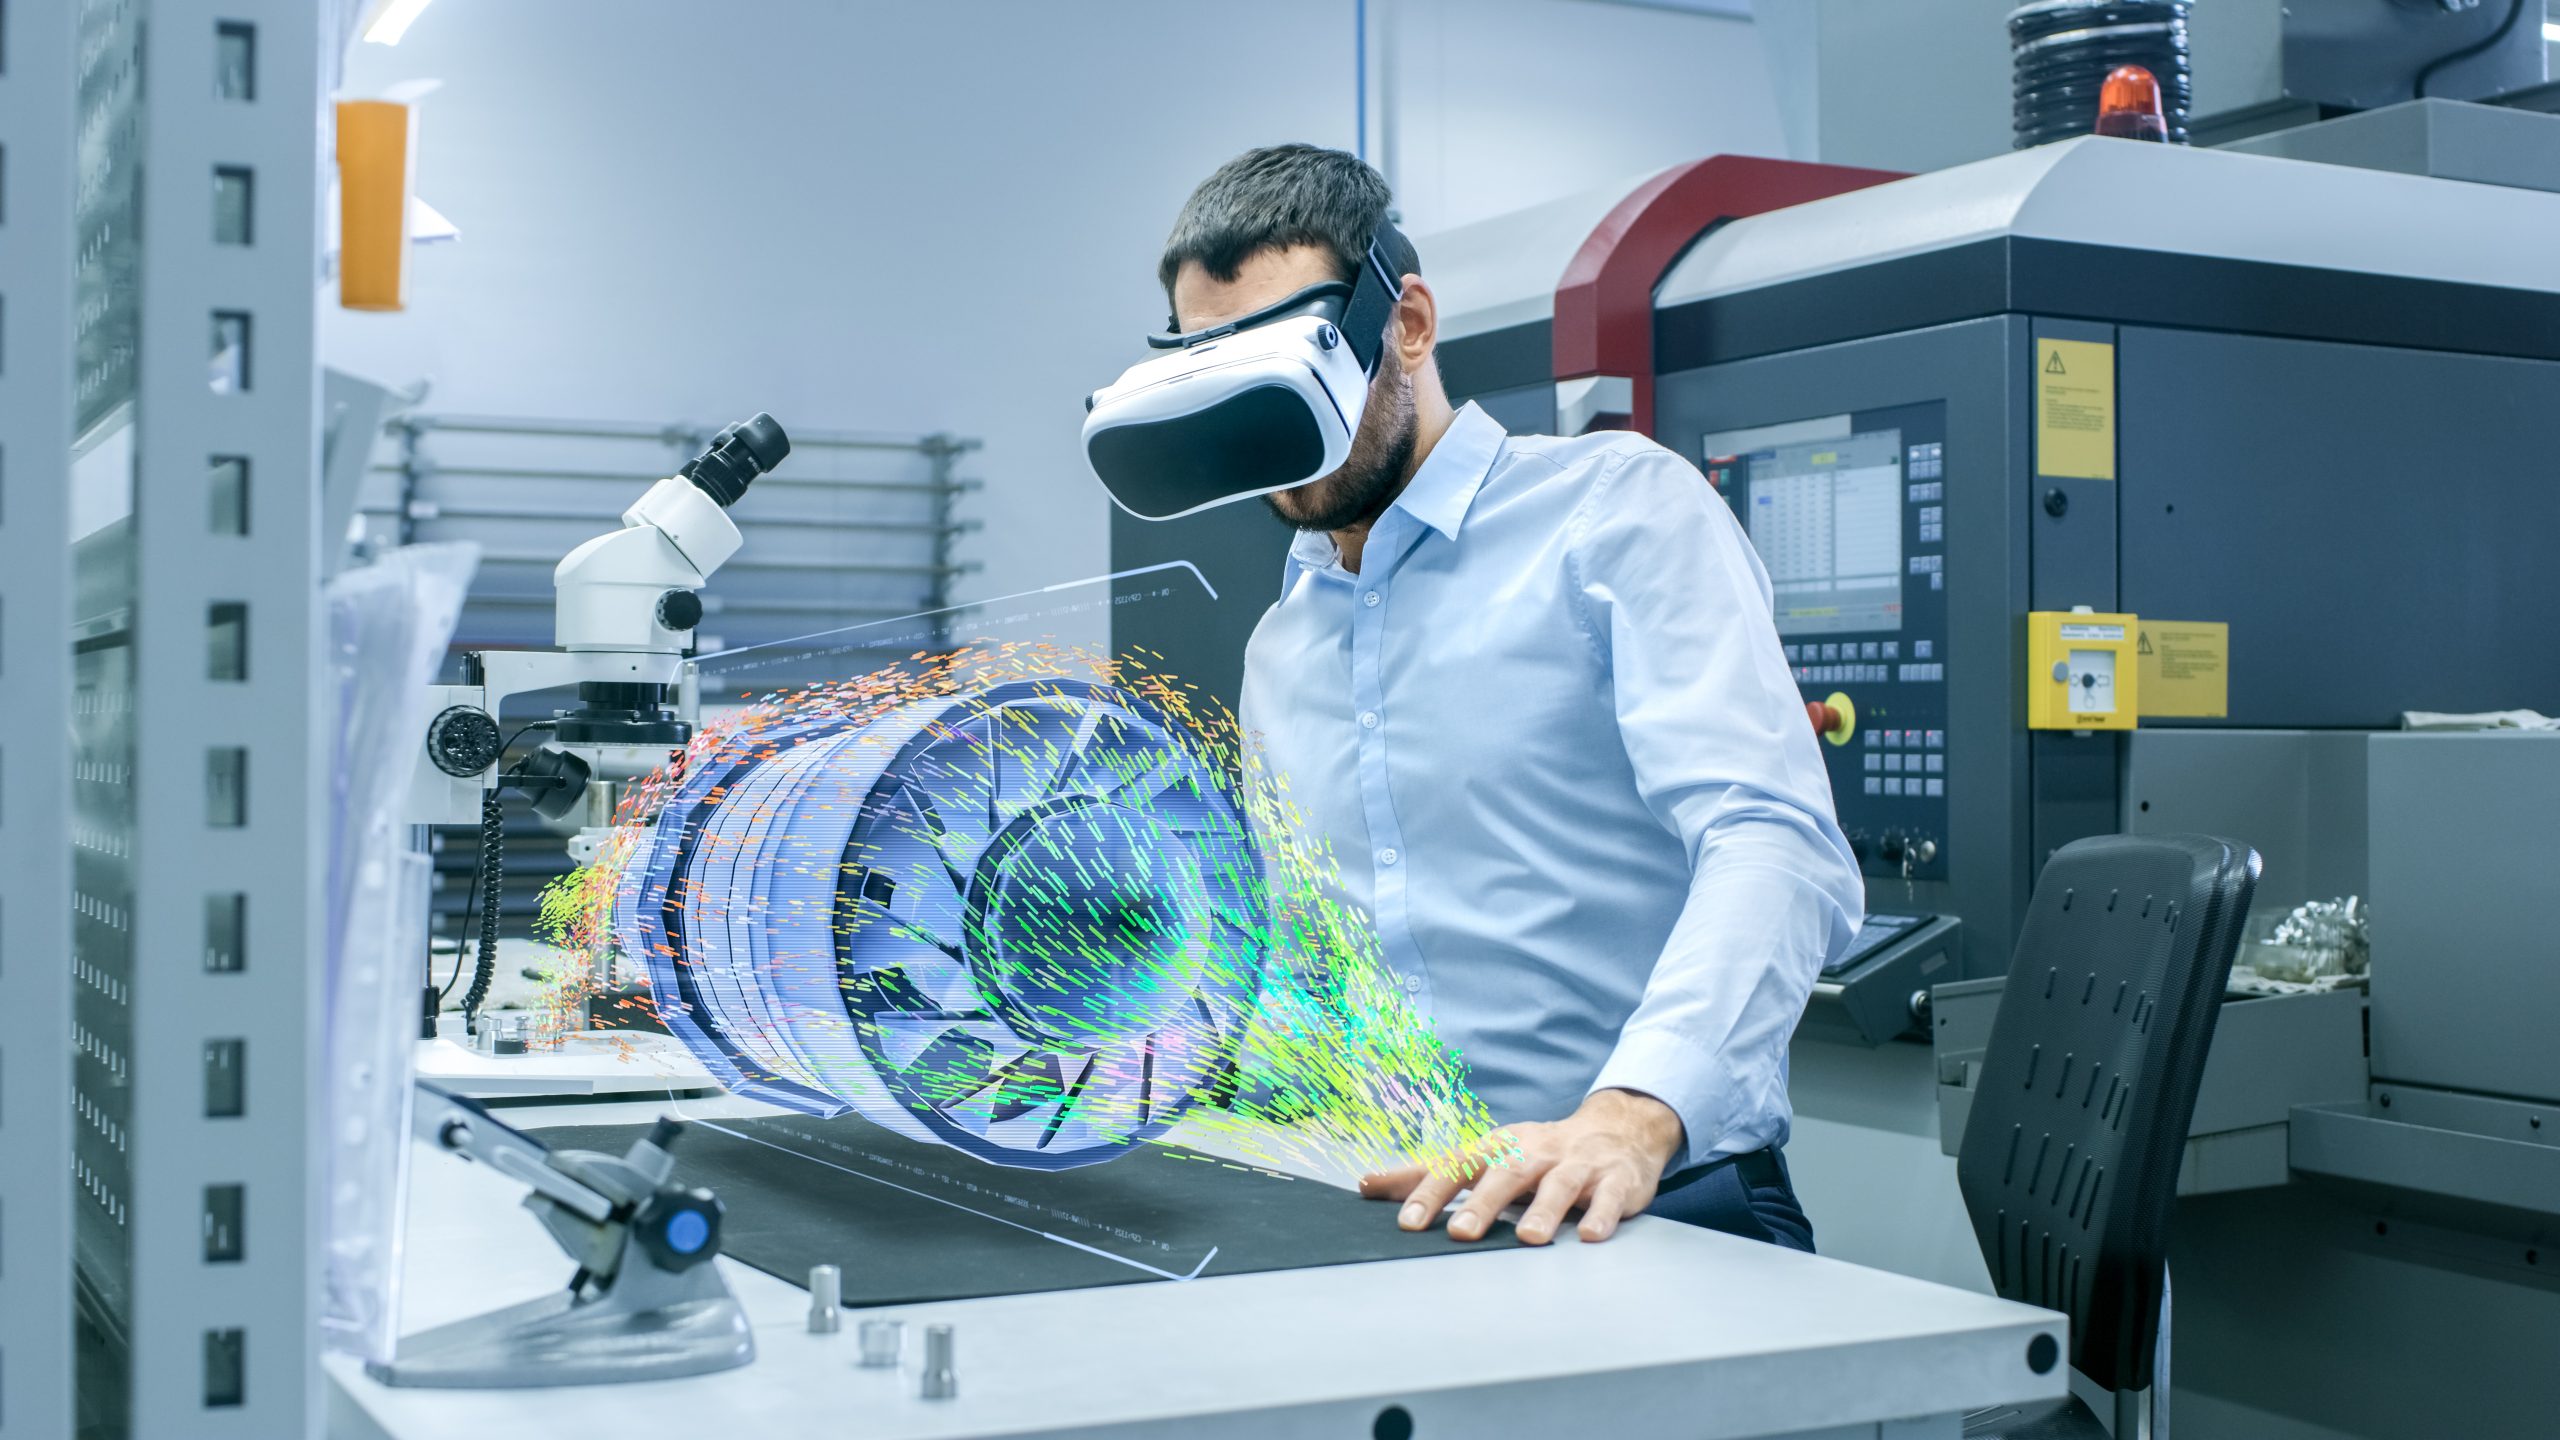 Factory Chief Engineer Wearing VR Headset designs engine turbine on the Holographic Projection table. Futuristic design of virtual mixed reality application.